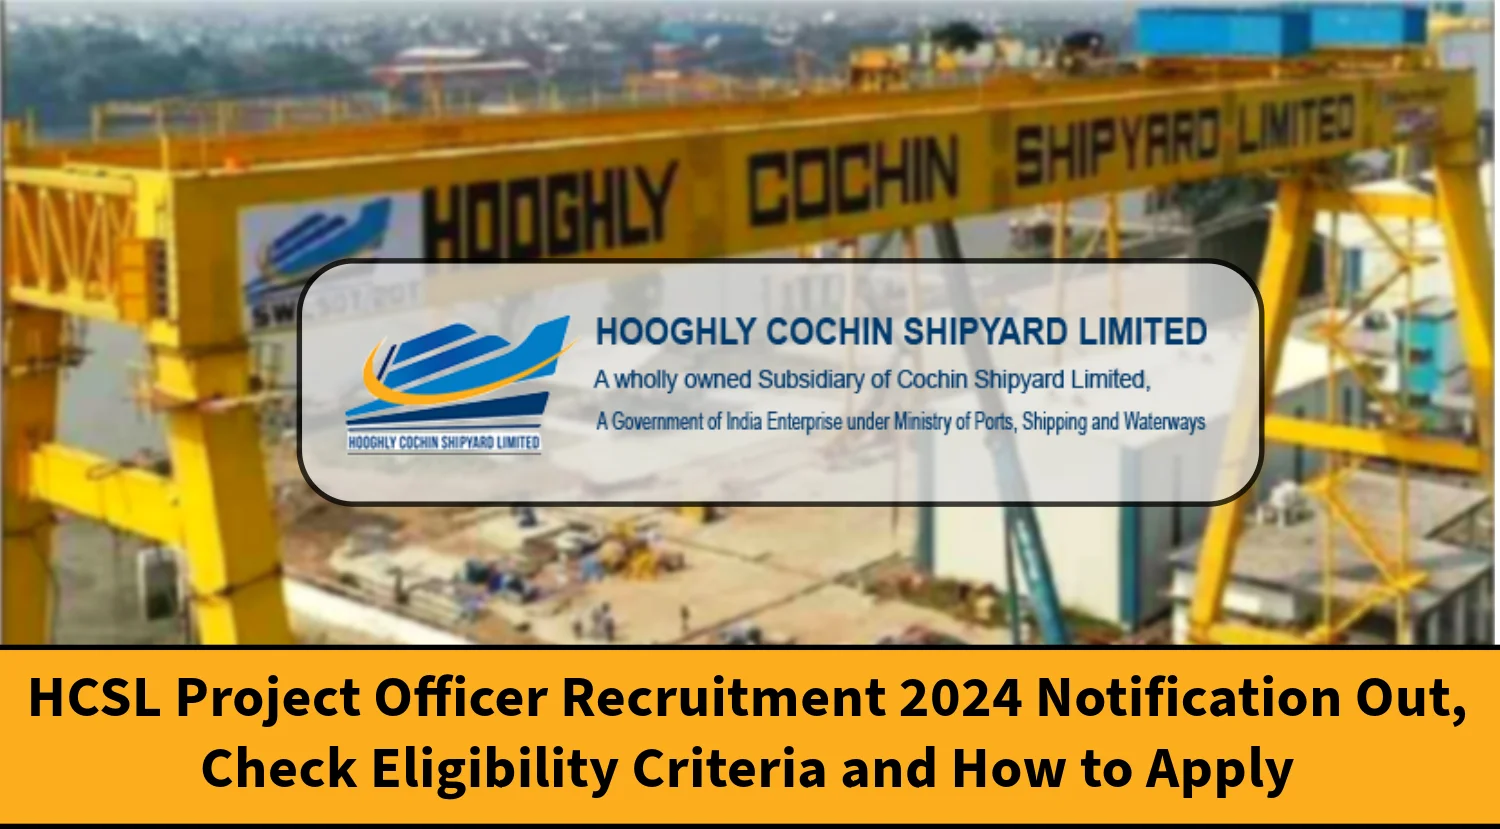 HCSL Project Officer Recruitment 2024 Notification Out